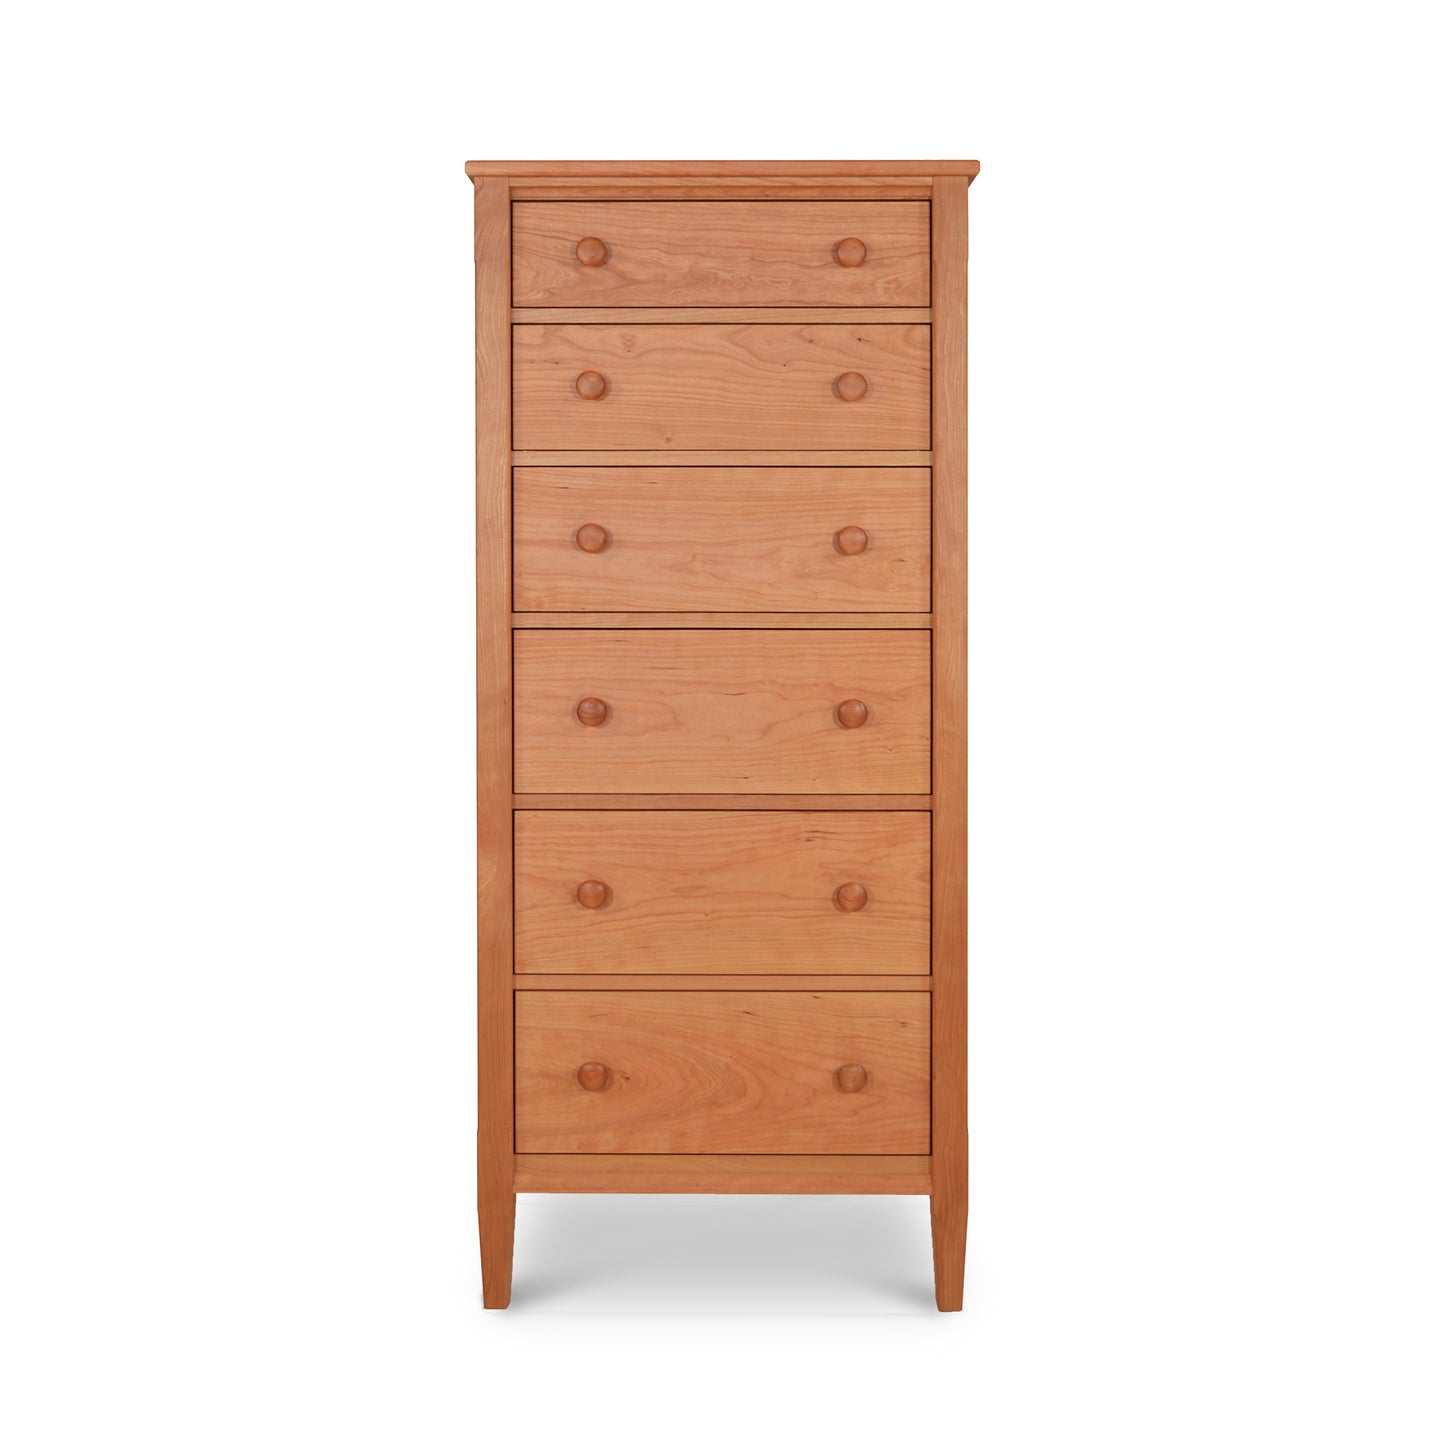 Alt text: A handcrafted, solid wood Vermont Shaker Lingerie Chest made from premium maple with a natural finish. Featuring six spacious drawers with round wooden knobs and four sturdy legs, this classic design exemplifies the quality of American-made furniture. Perfect for adding elegant storage to any space, this piece is crafted by Maple Corner Woodworks.